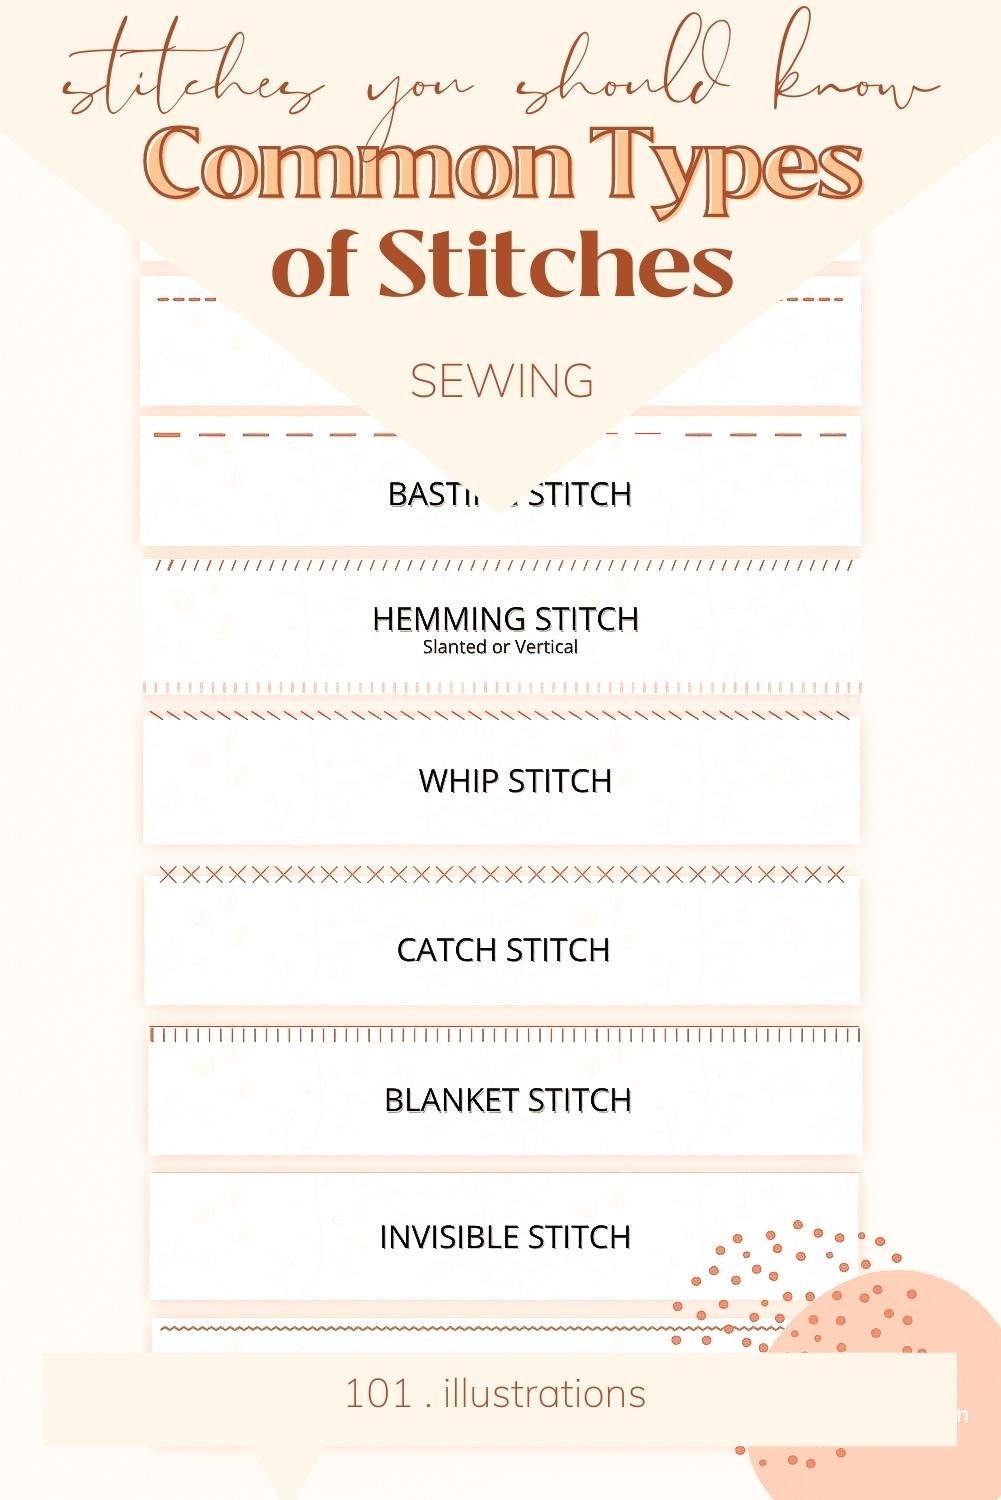 COMMON TYPES OF SEWING STITCHES